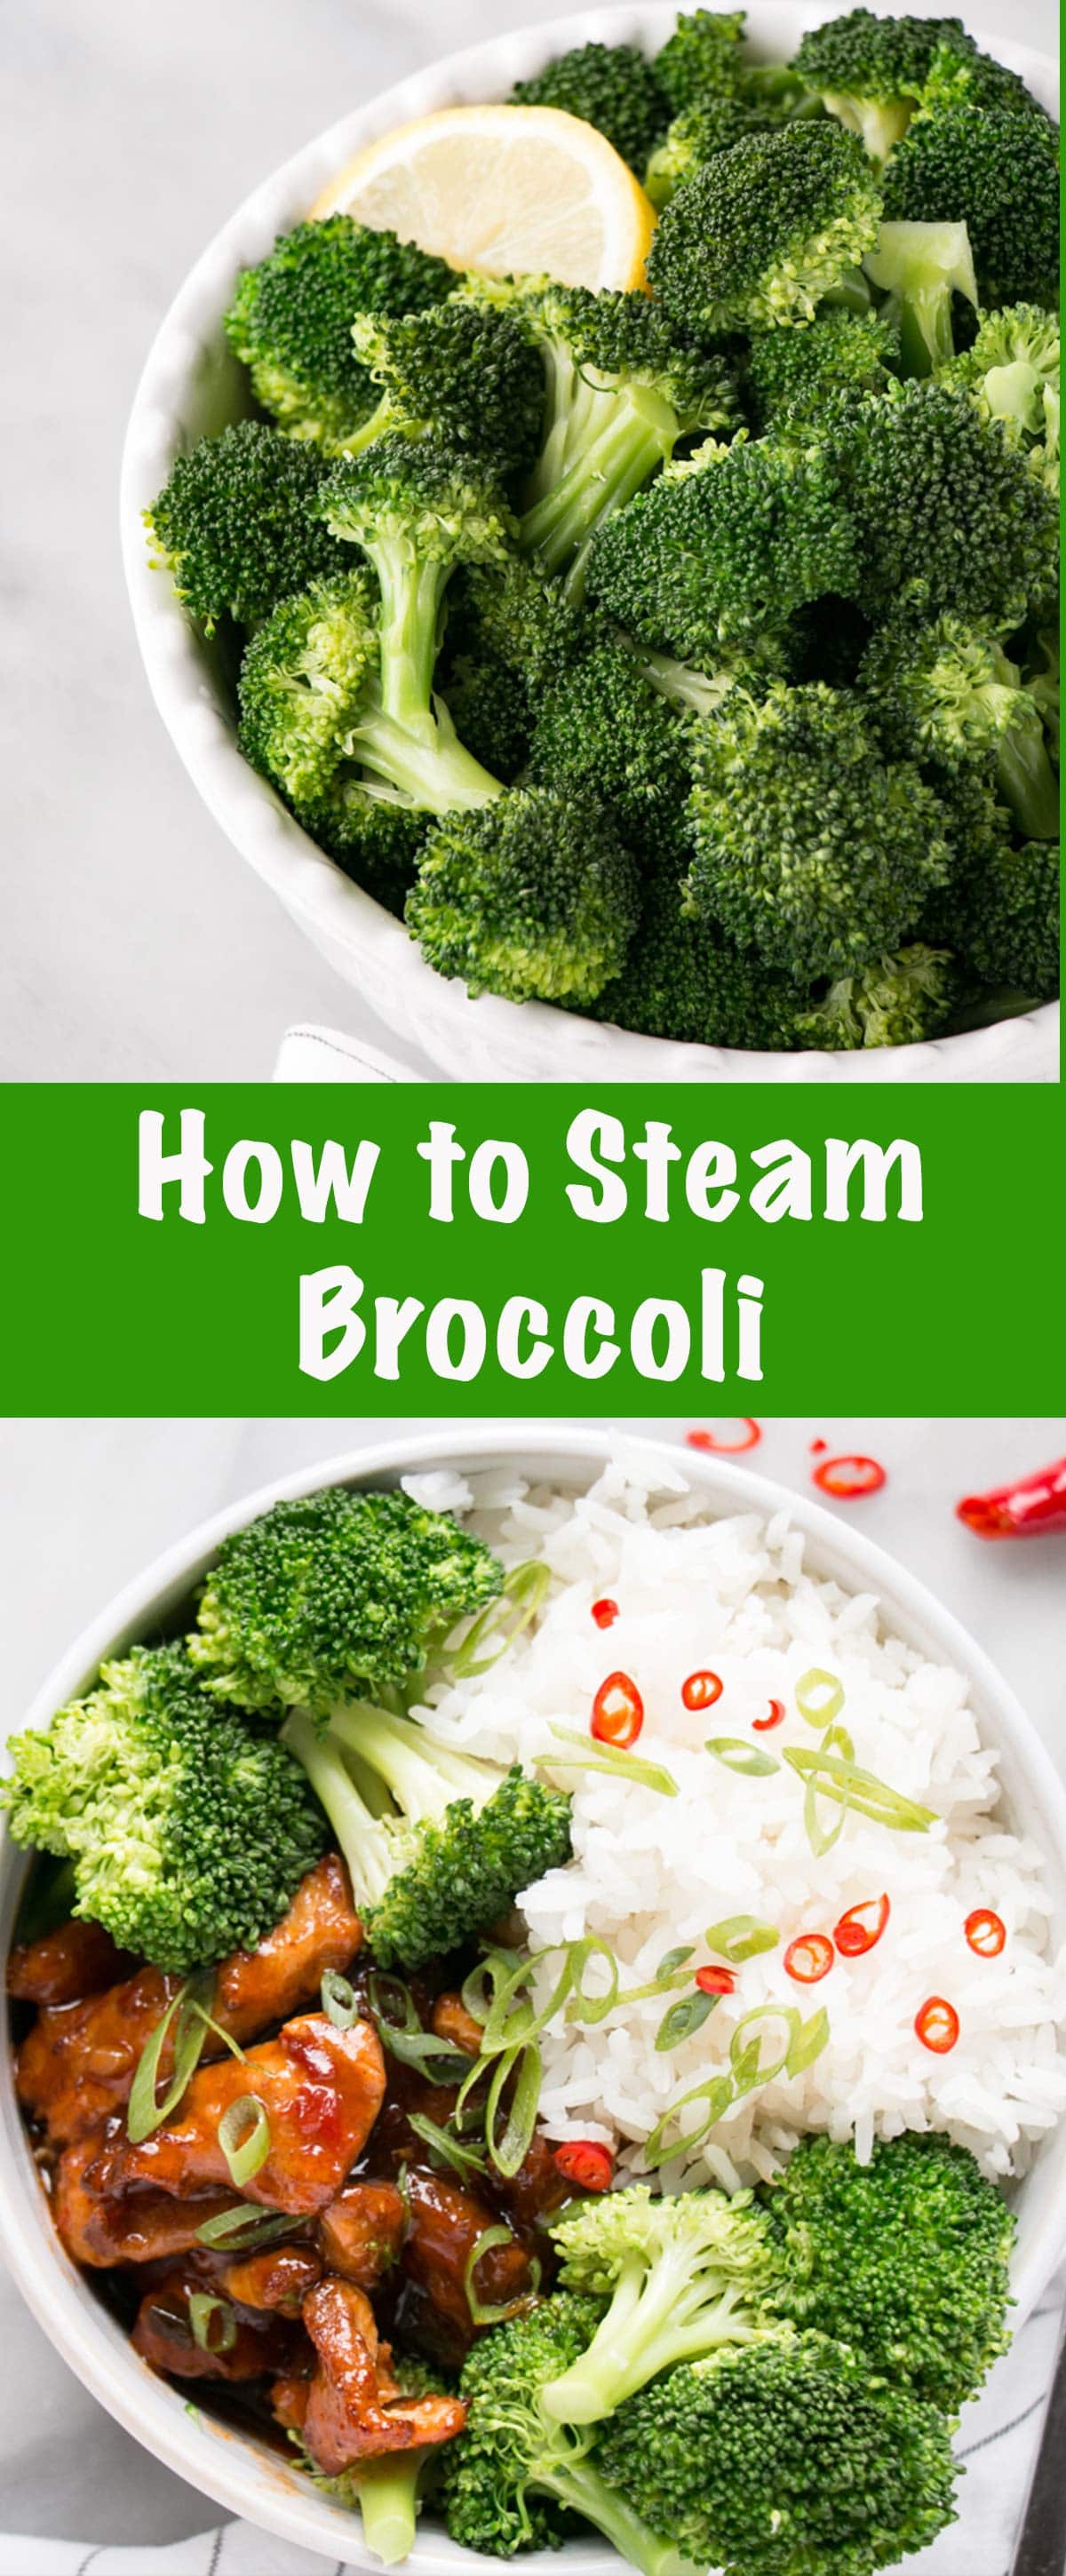 How to Steam Broccoli is a guide to get crisp, bright green broccoli every time without a steamer. Using simply water and broccoli, this easy and nutritious cooking method is a breeze to master. via @mykitchenlove